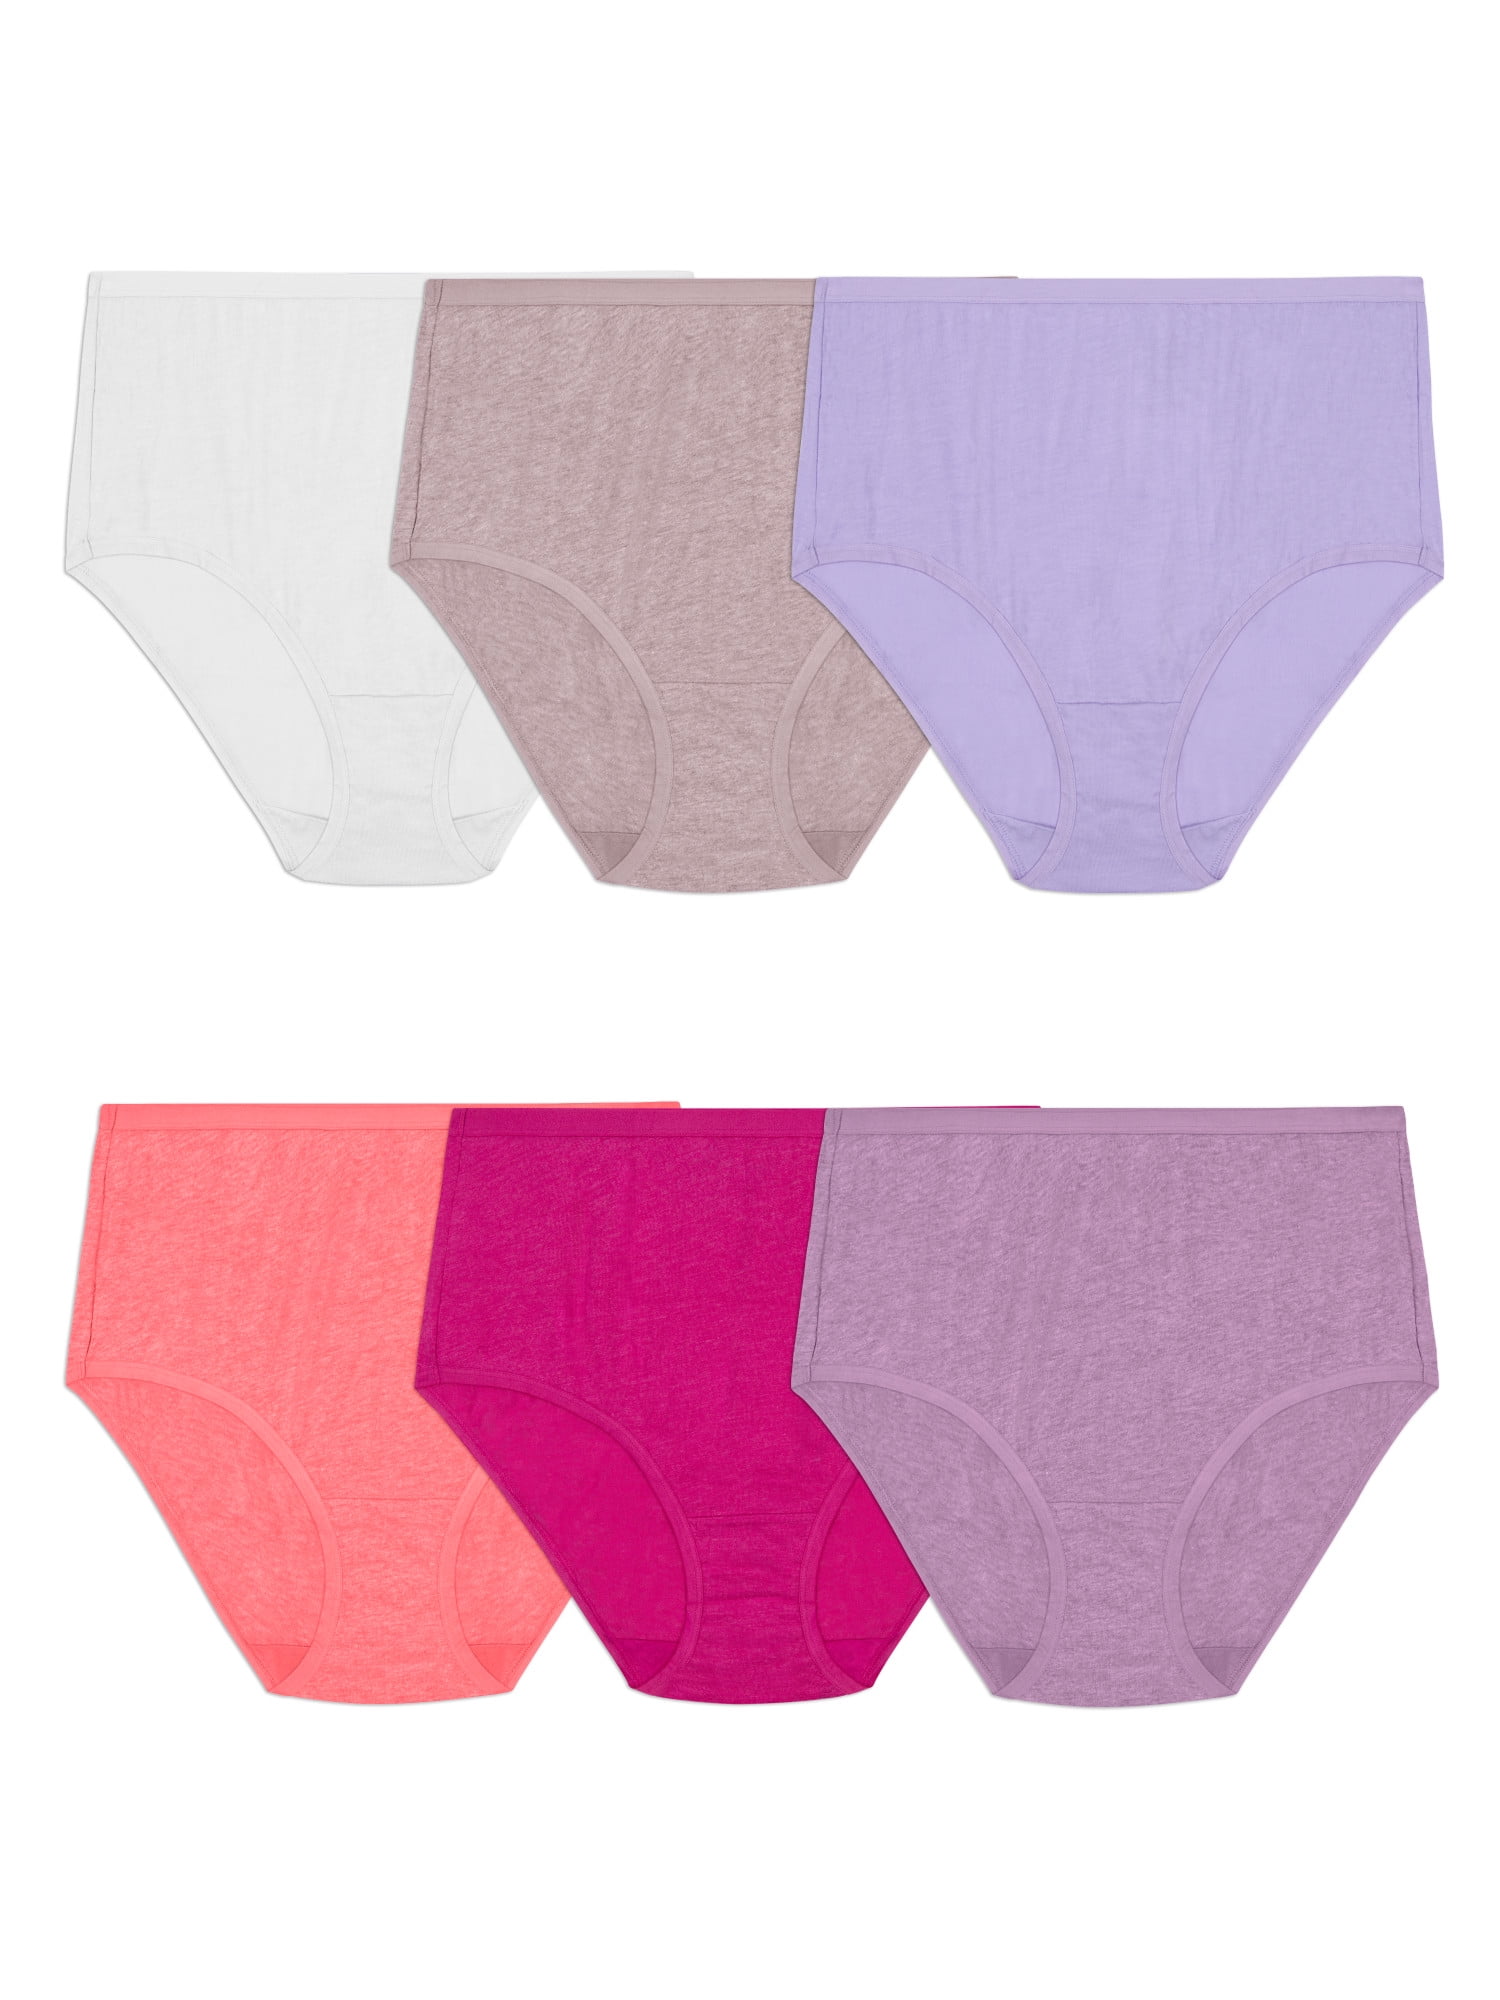 Fruit of the Loom Women's Premium Underwear (Ultra Soft & Breathable)